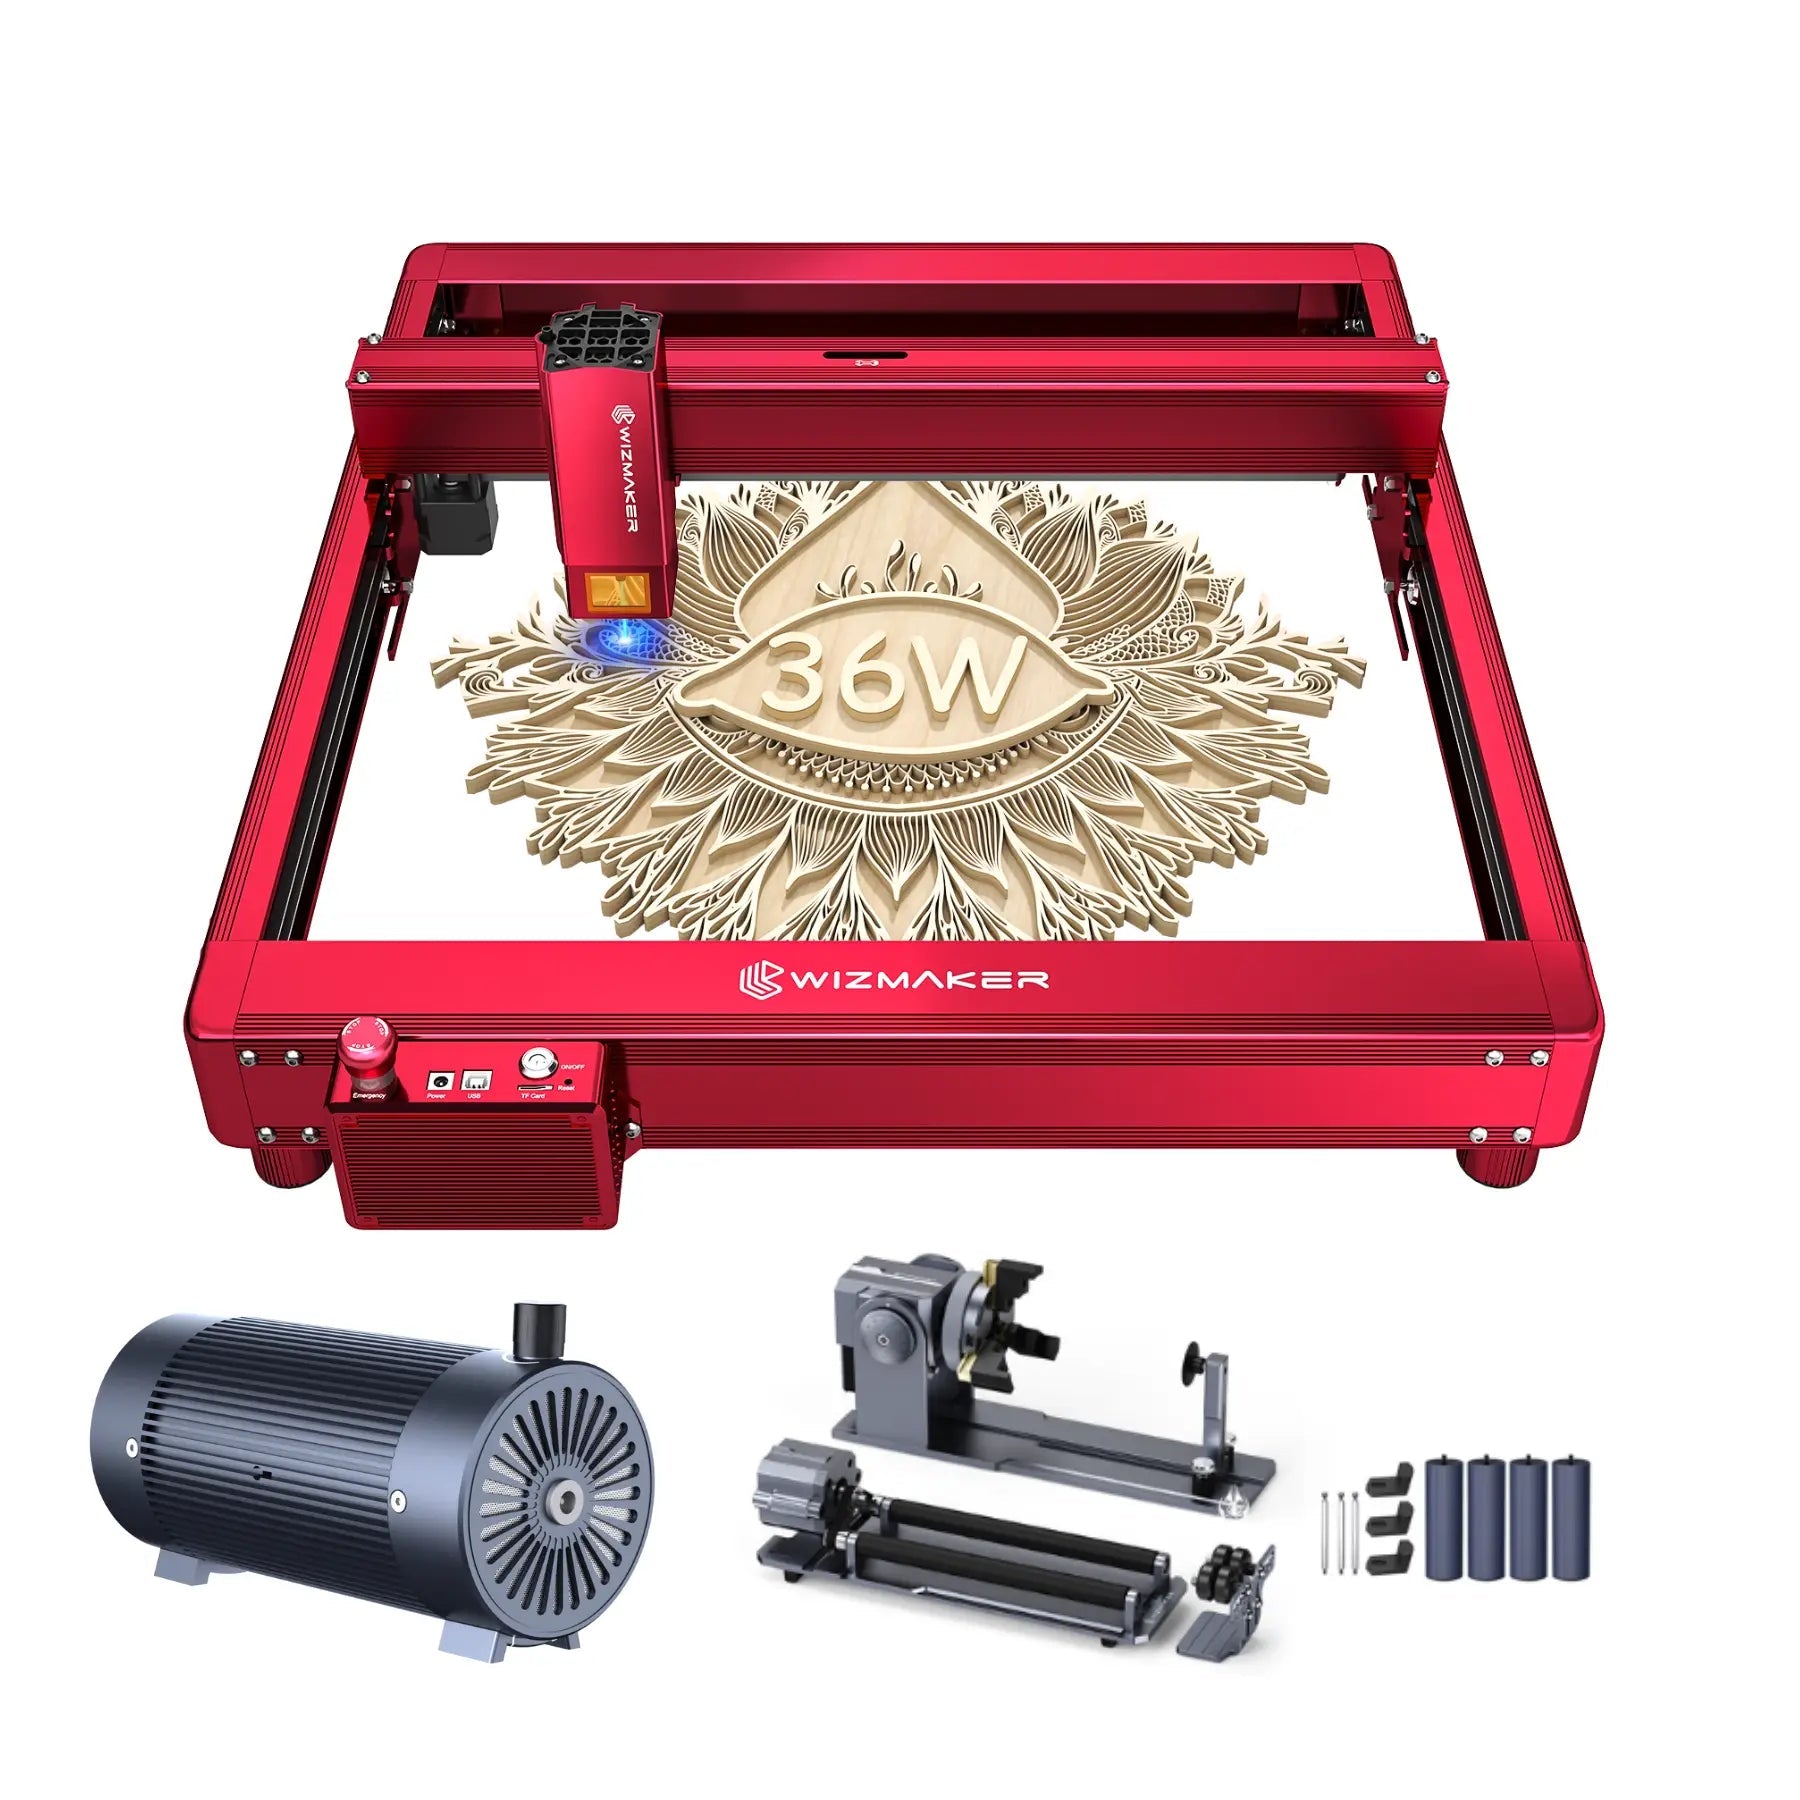 WIZMAKER L1 36W Laser Engraver Cutting Machine with Air Assist & 4-in-1 Laser Rotary Set WIZMAKER Red EU Plug 